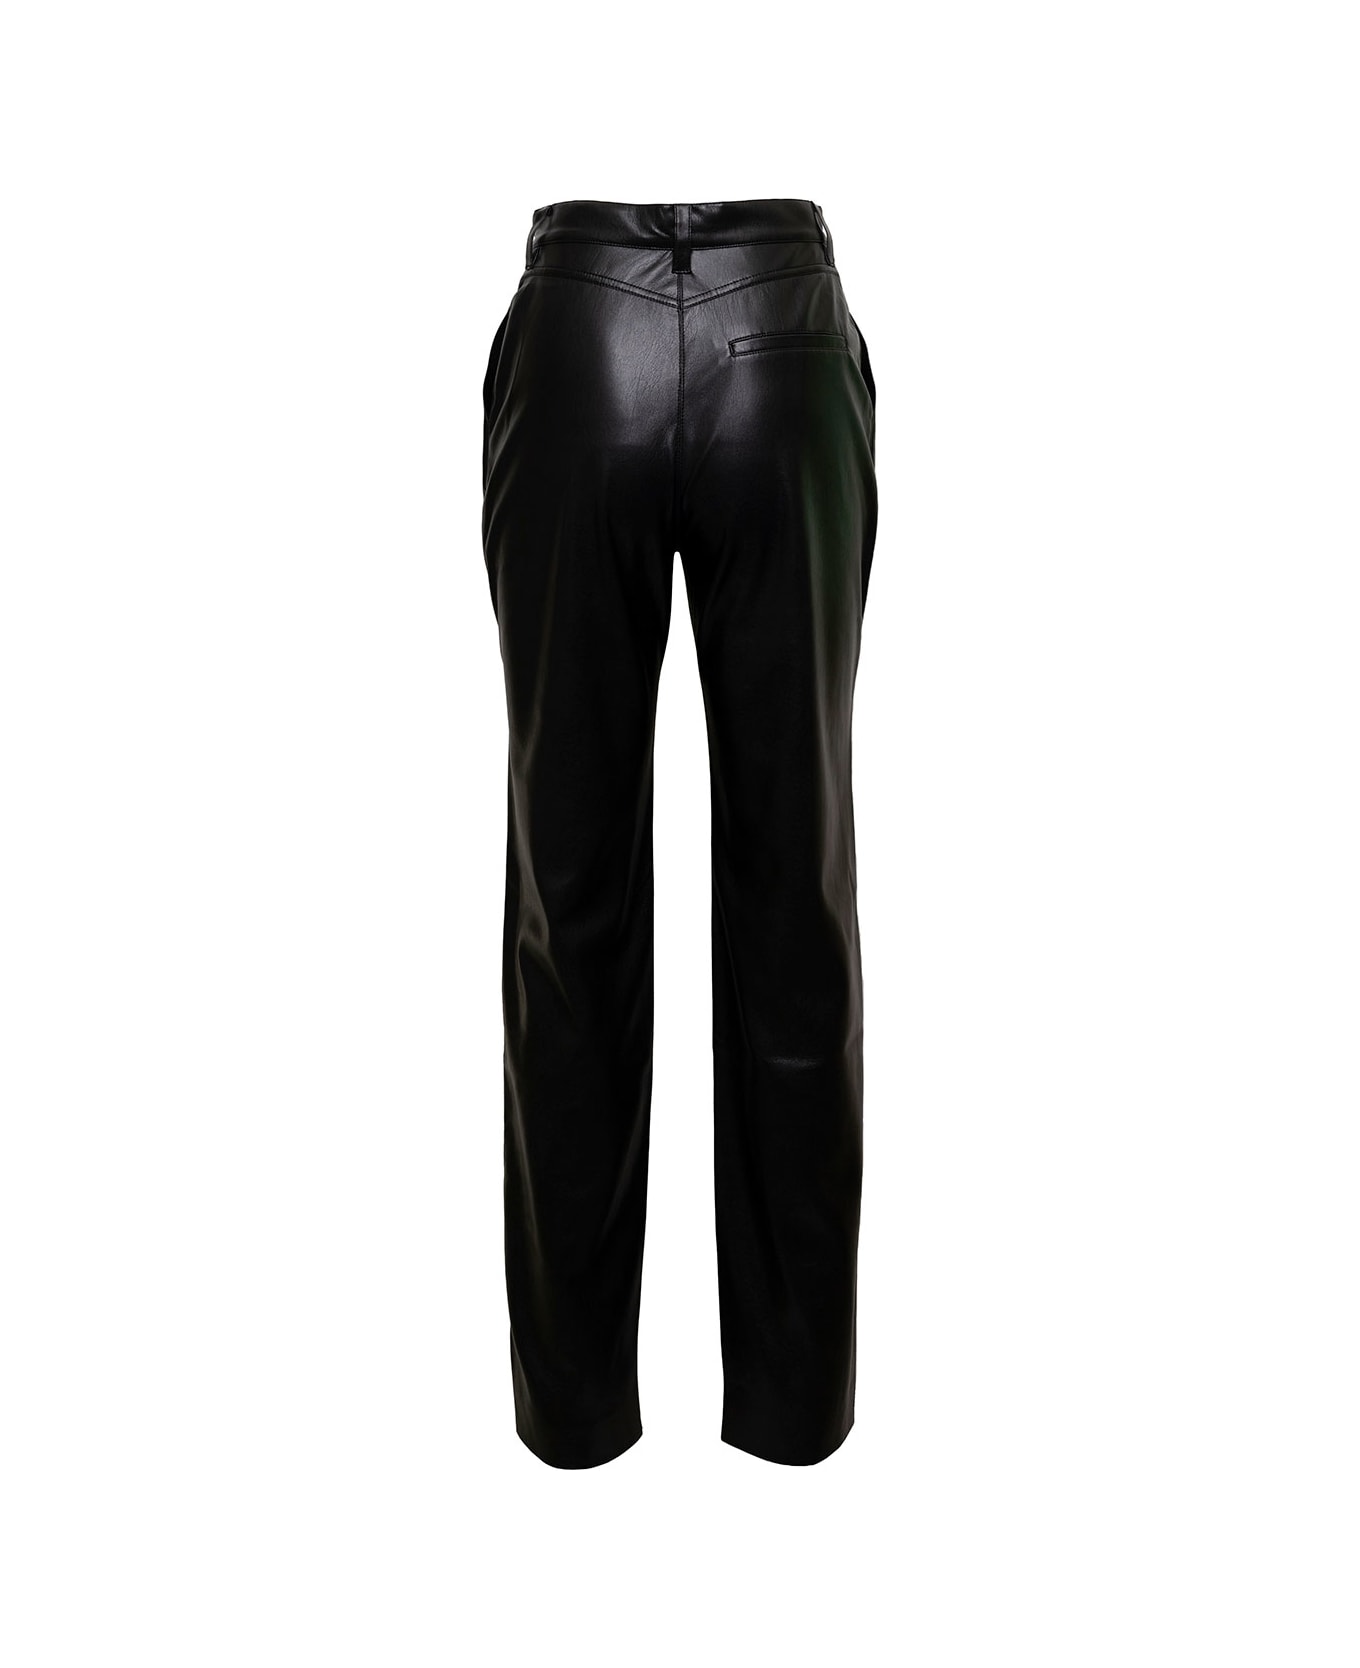 Nanushka Black Slim Pants With Slits At The Front In Faux Leather Woman - Black ボトムス